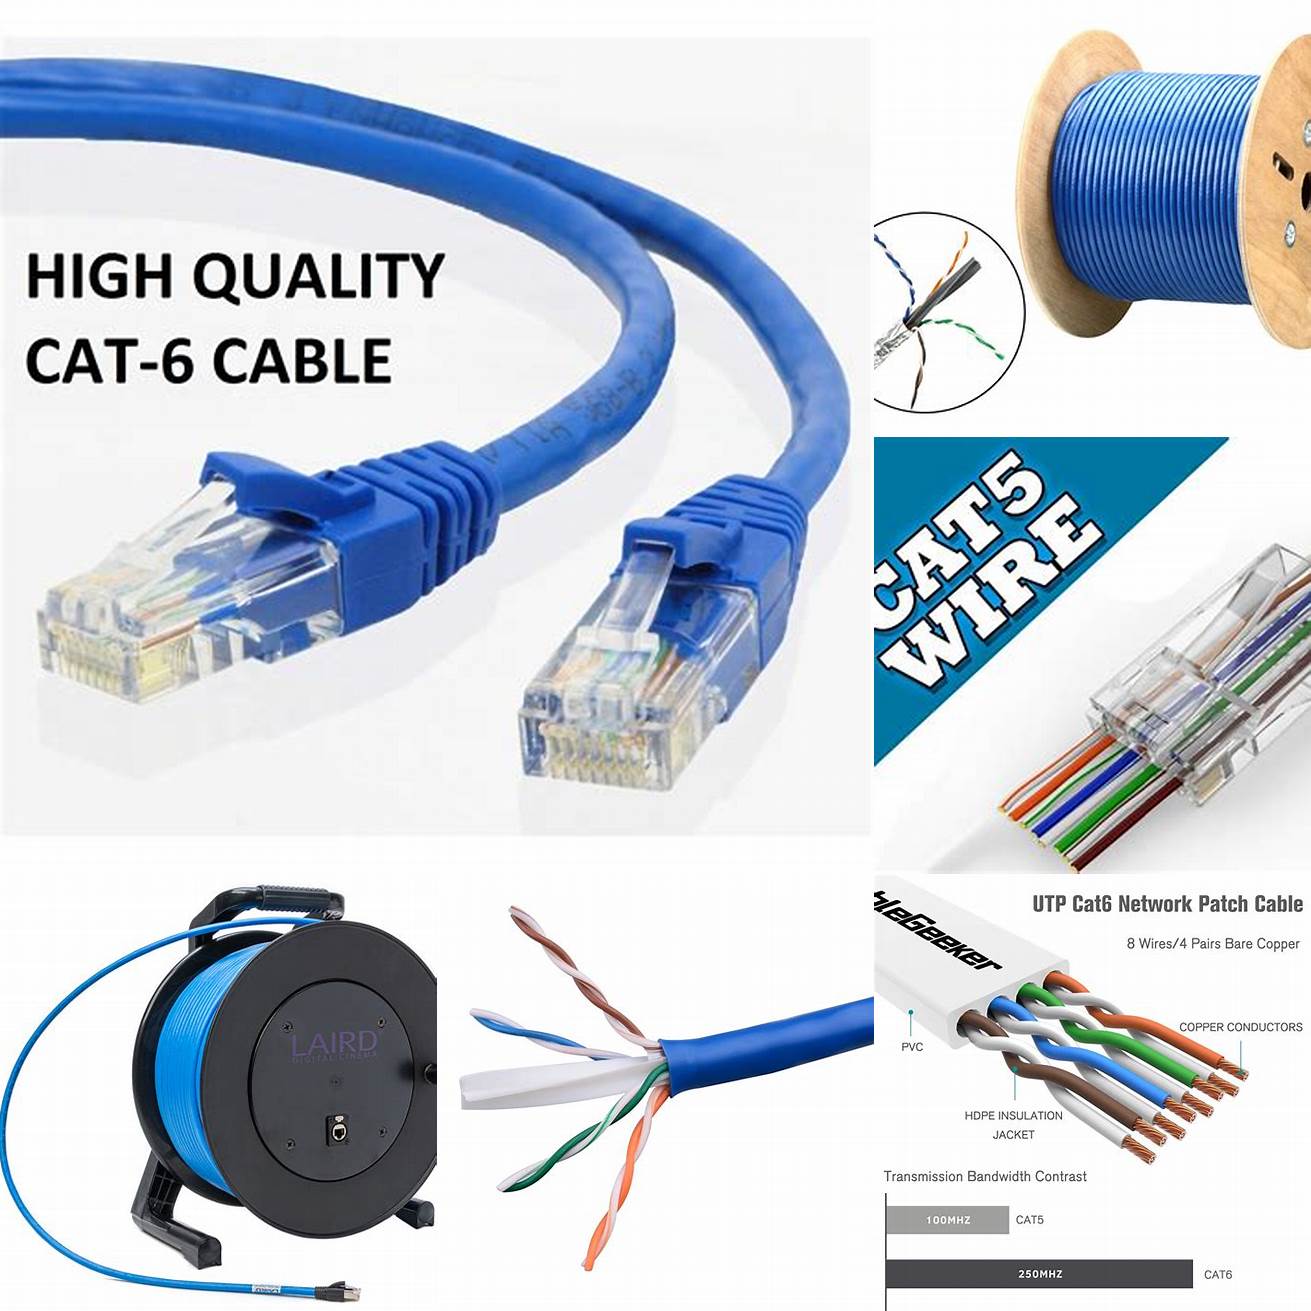 6 Cat 6 cables can be run up to 328 feet